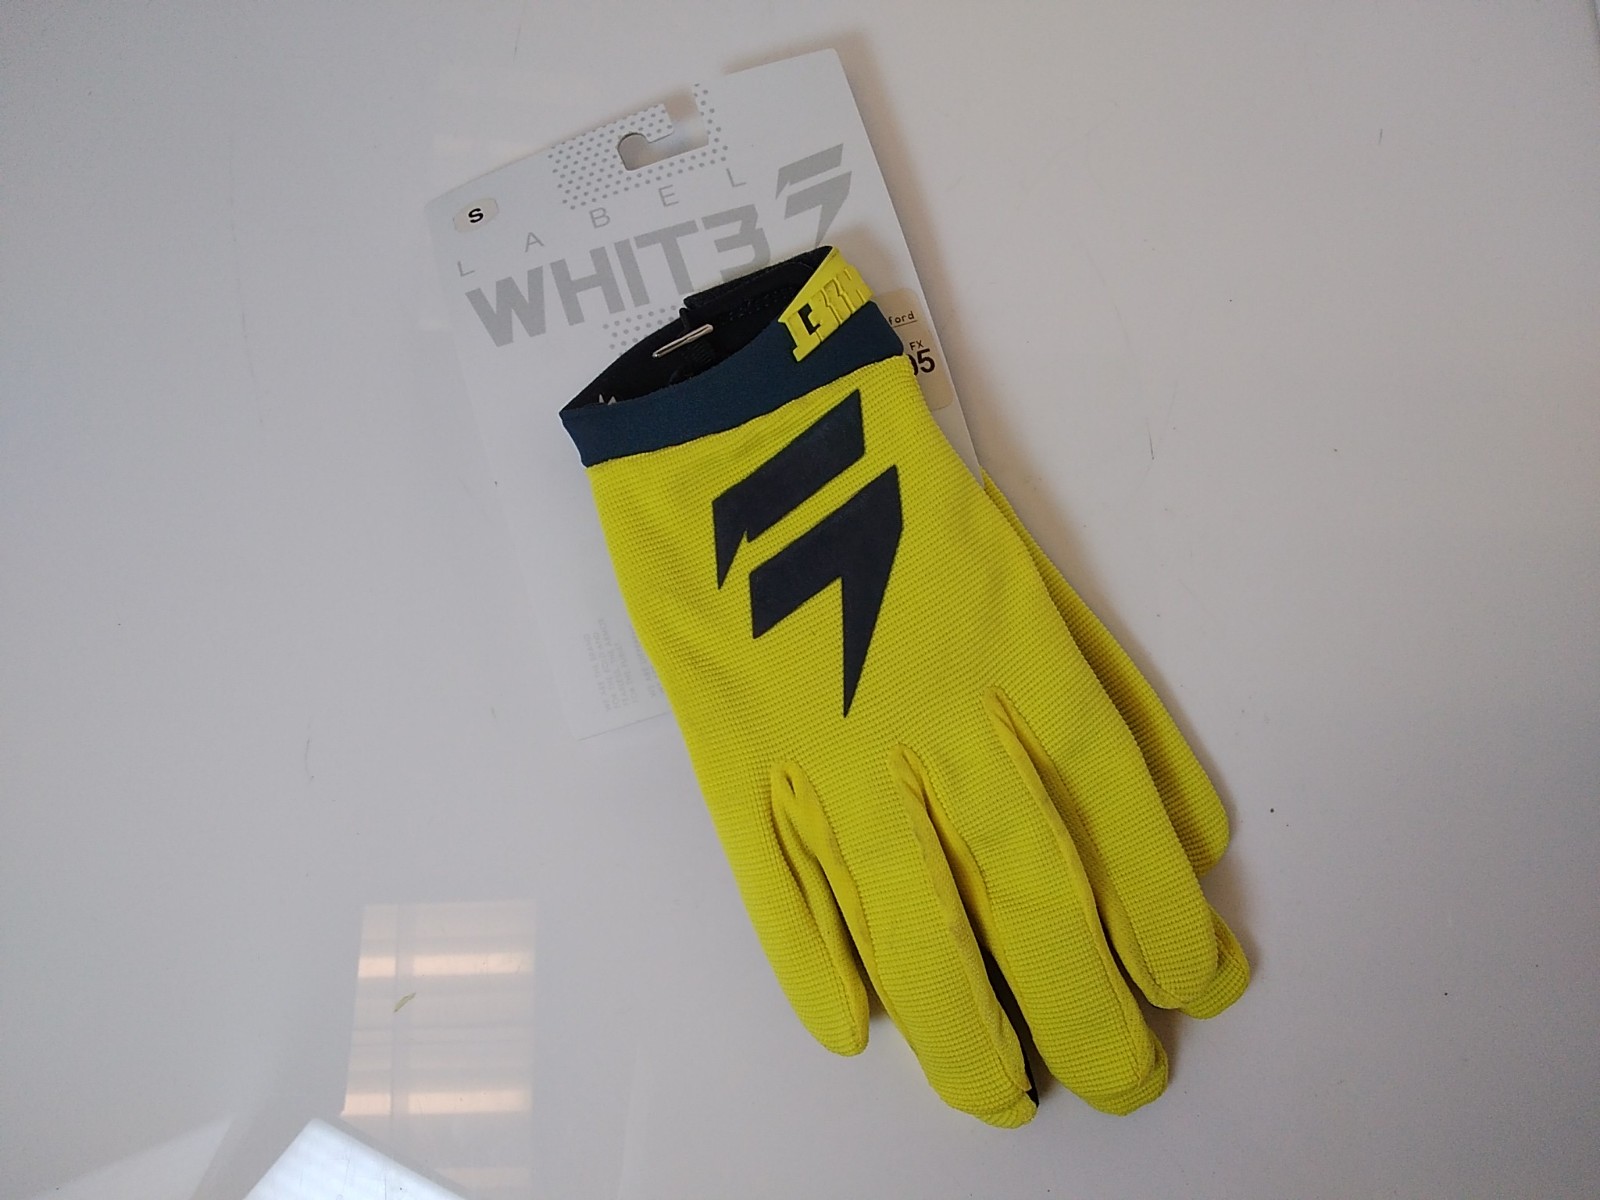 Shift WHITE LABEL Air MX Offroad Gloves Yellow Navy Small 19325-079-S